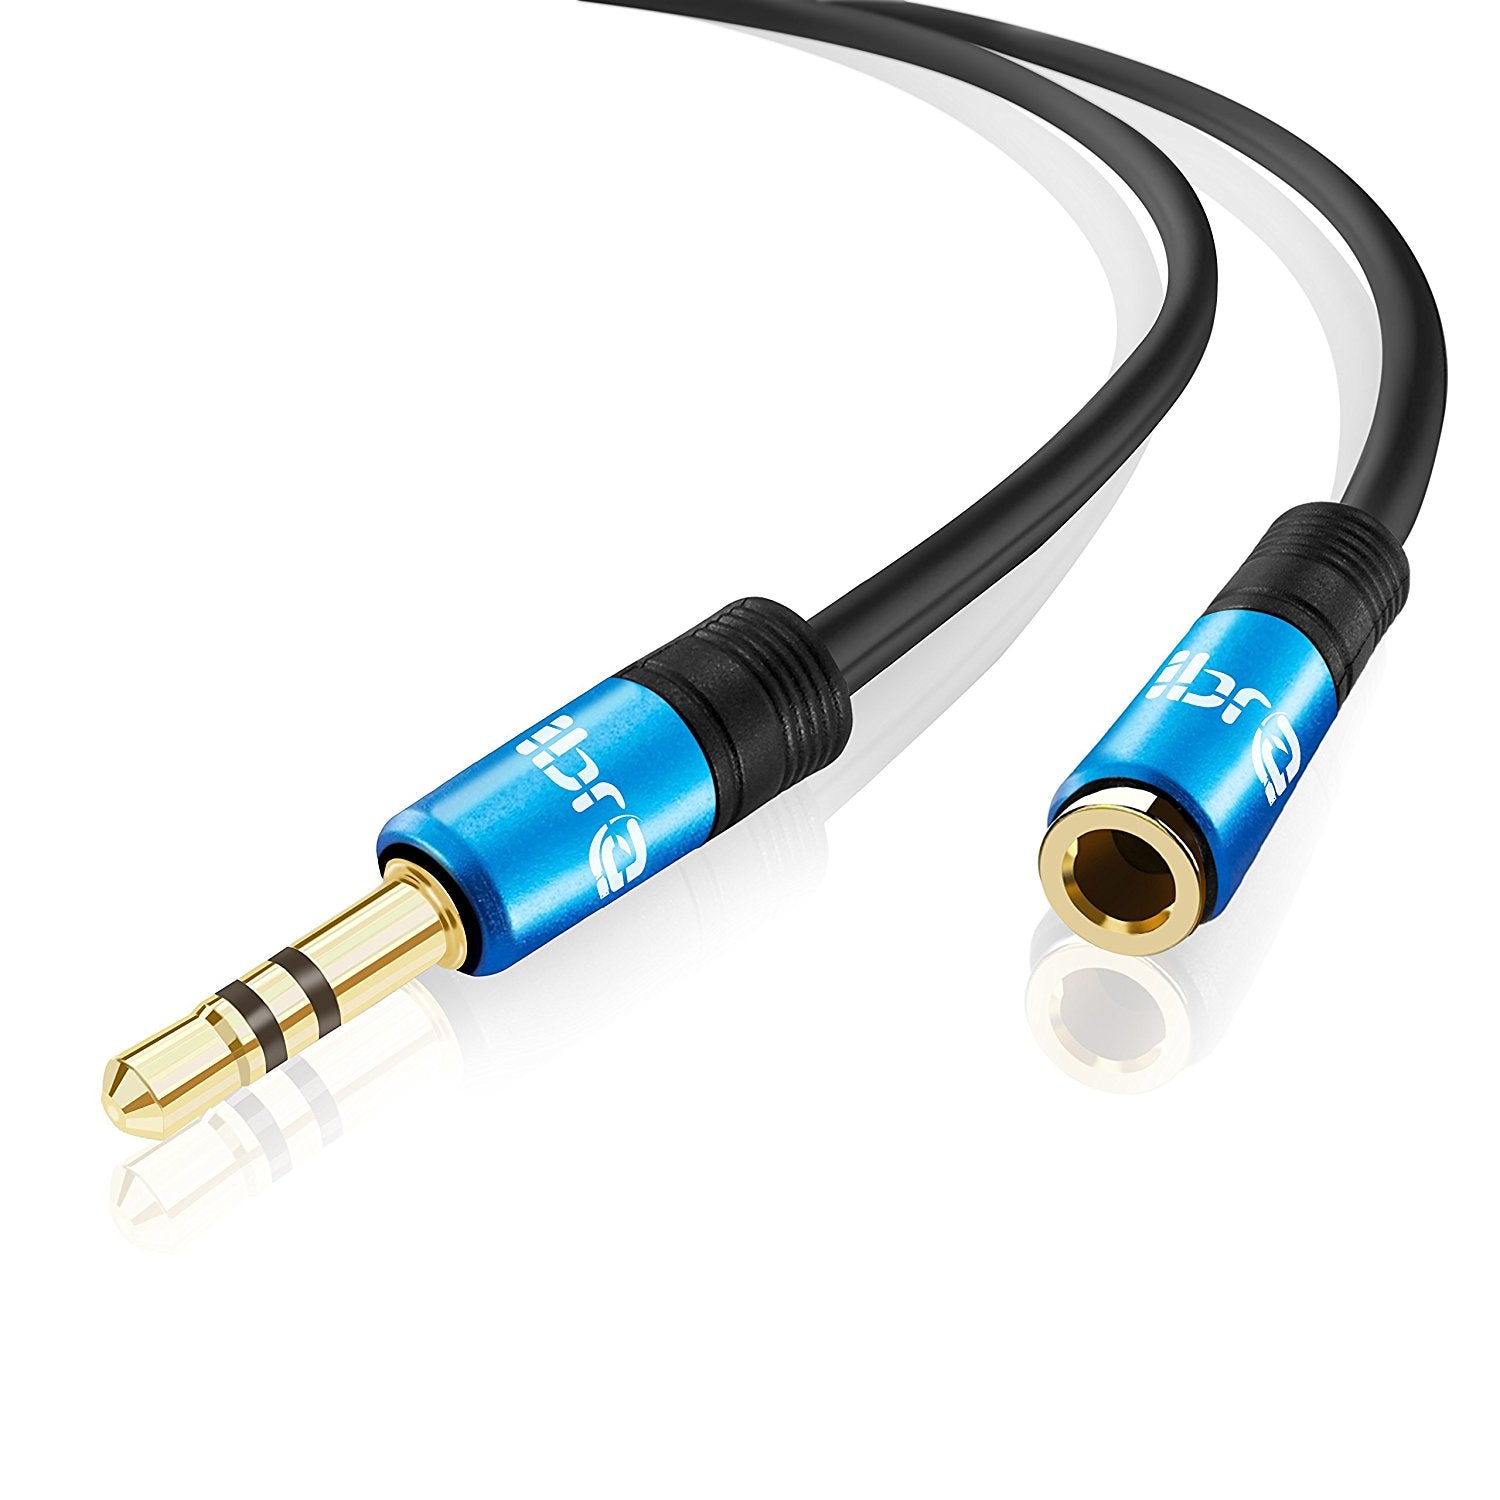 IBRA 7.5M Stereo Jack Extension Cable 3.5mm Male > 3.5mm Female - Blue